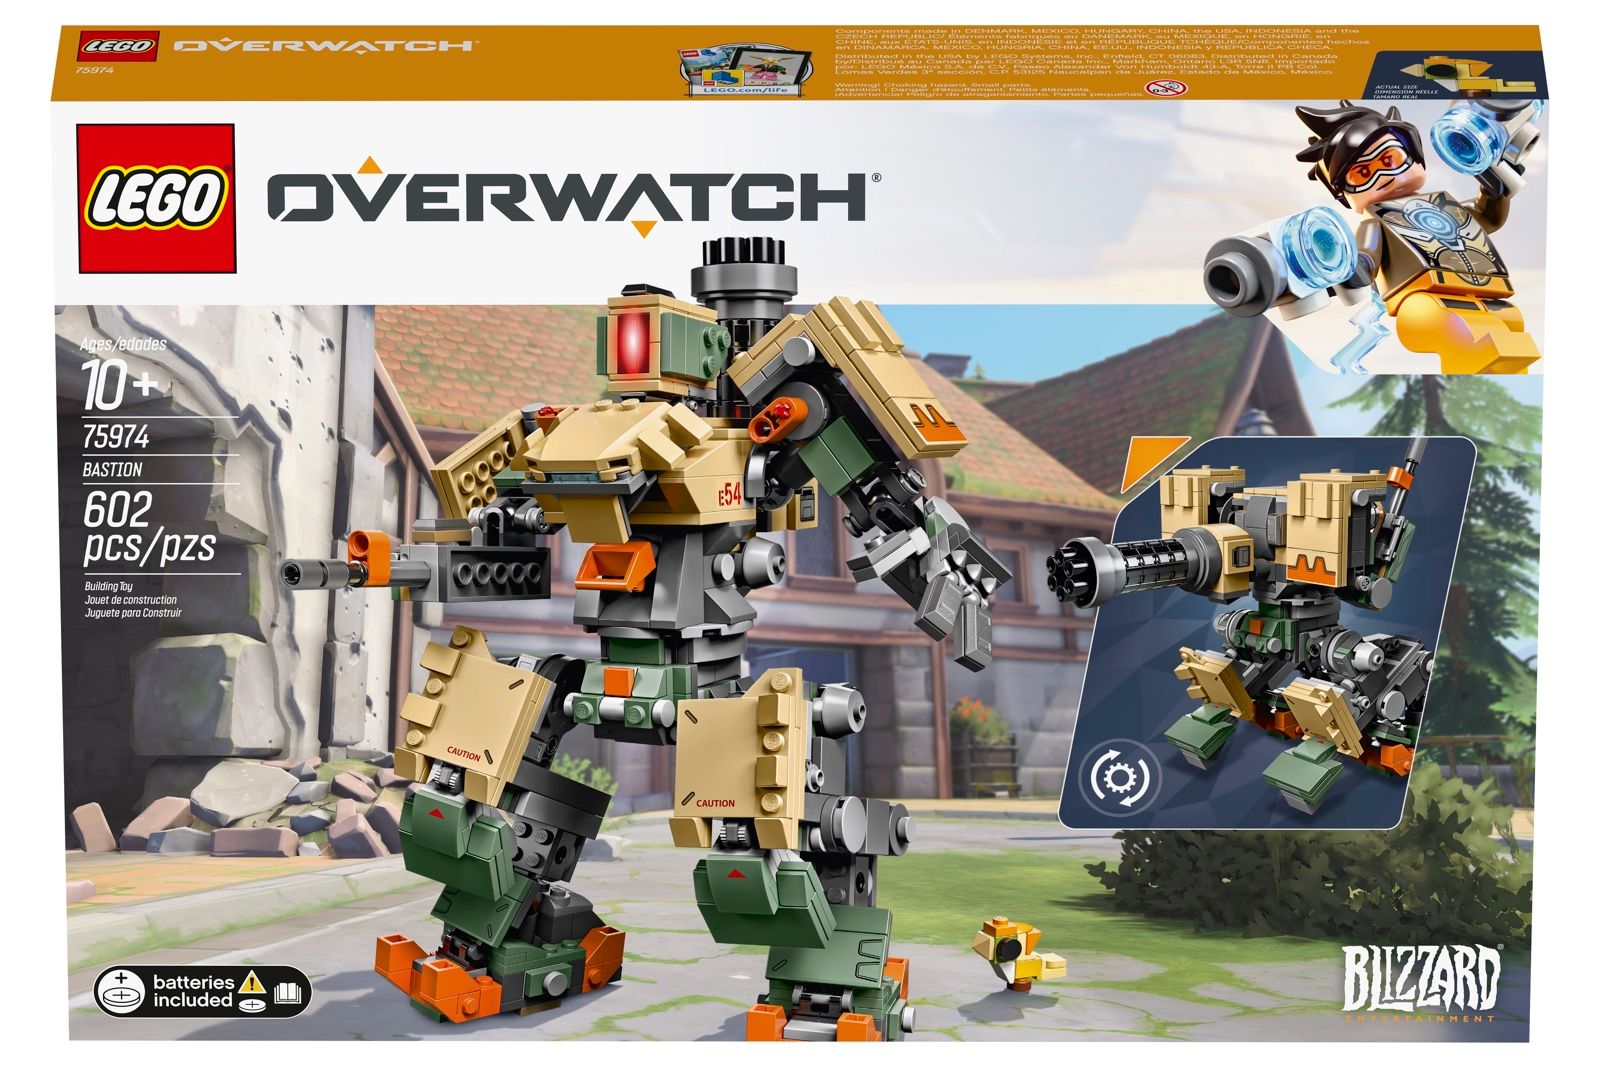 Lego reveals Overwatch sets and availability image 6